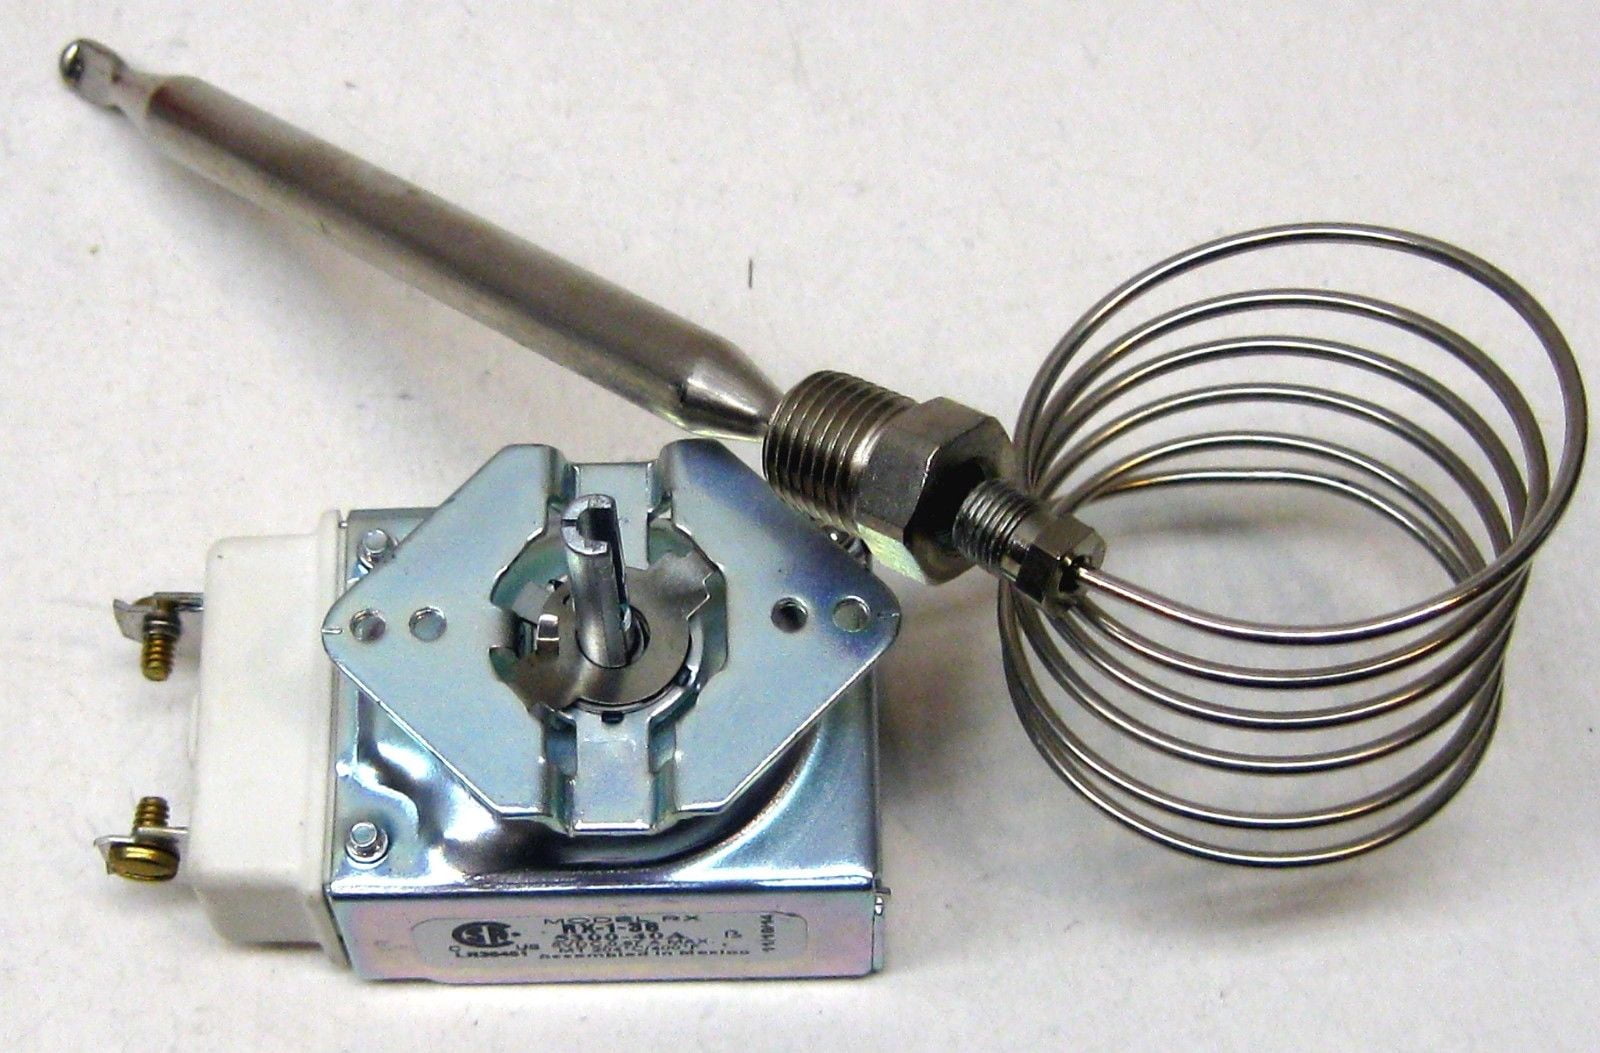 Gas Oven Thermostat Rx-1-24 461183 2ty9265 400044 for sale online 5300-402 Robertshaw Electric 